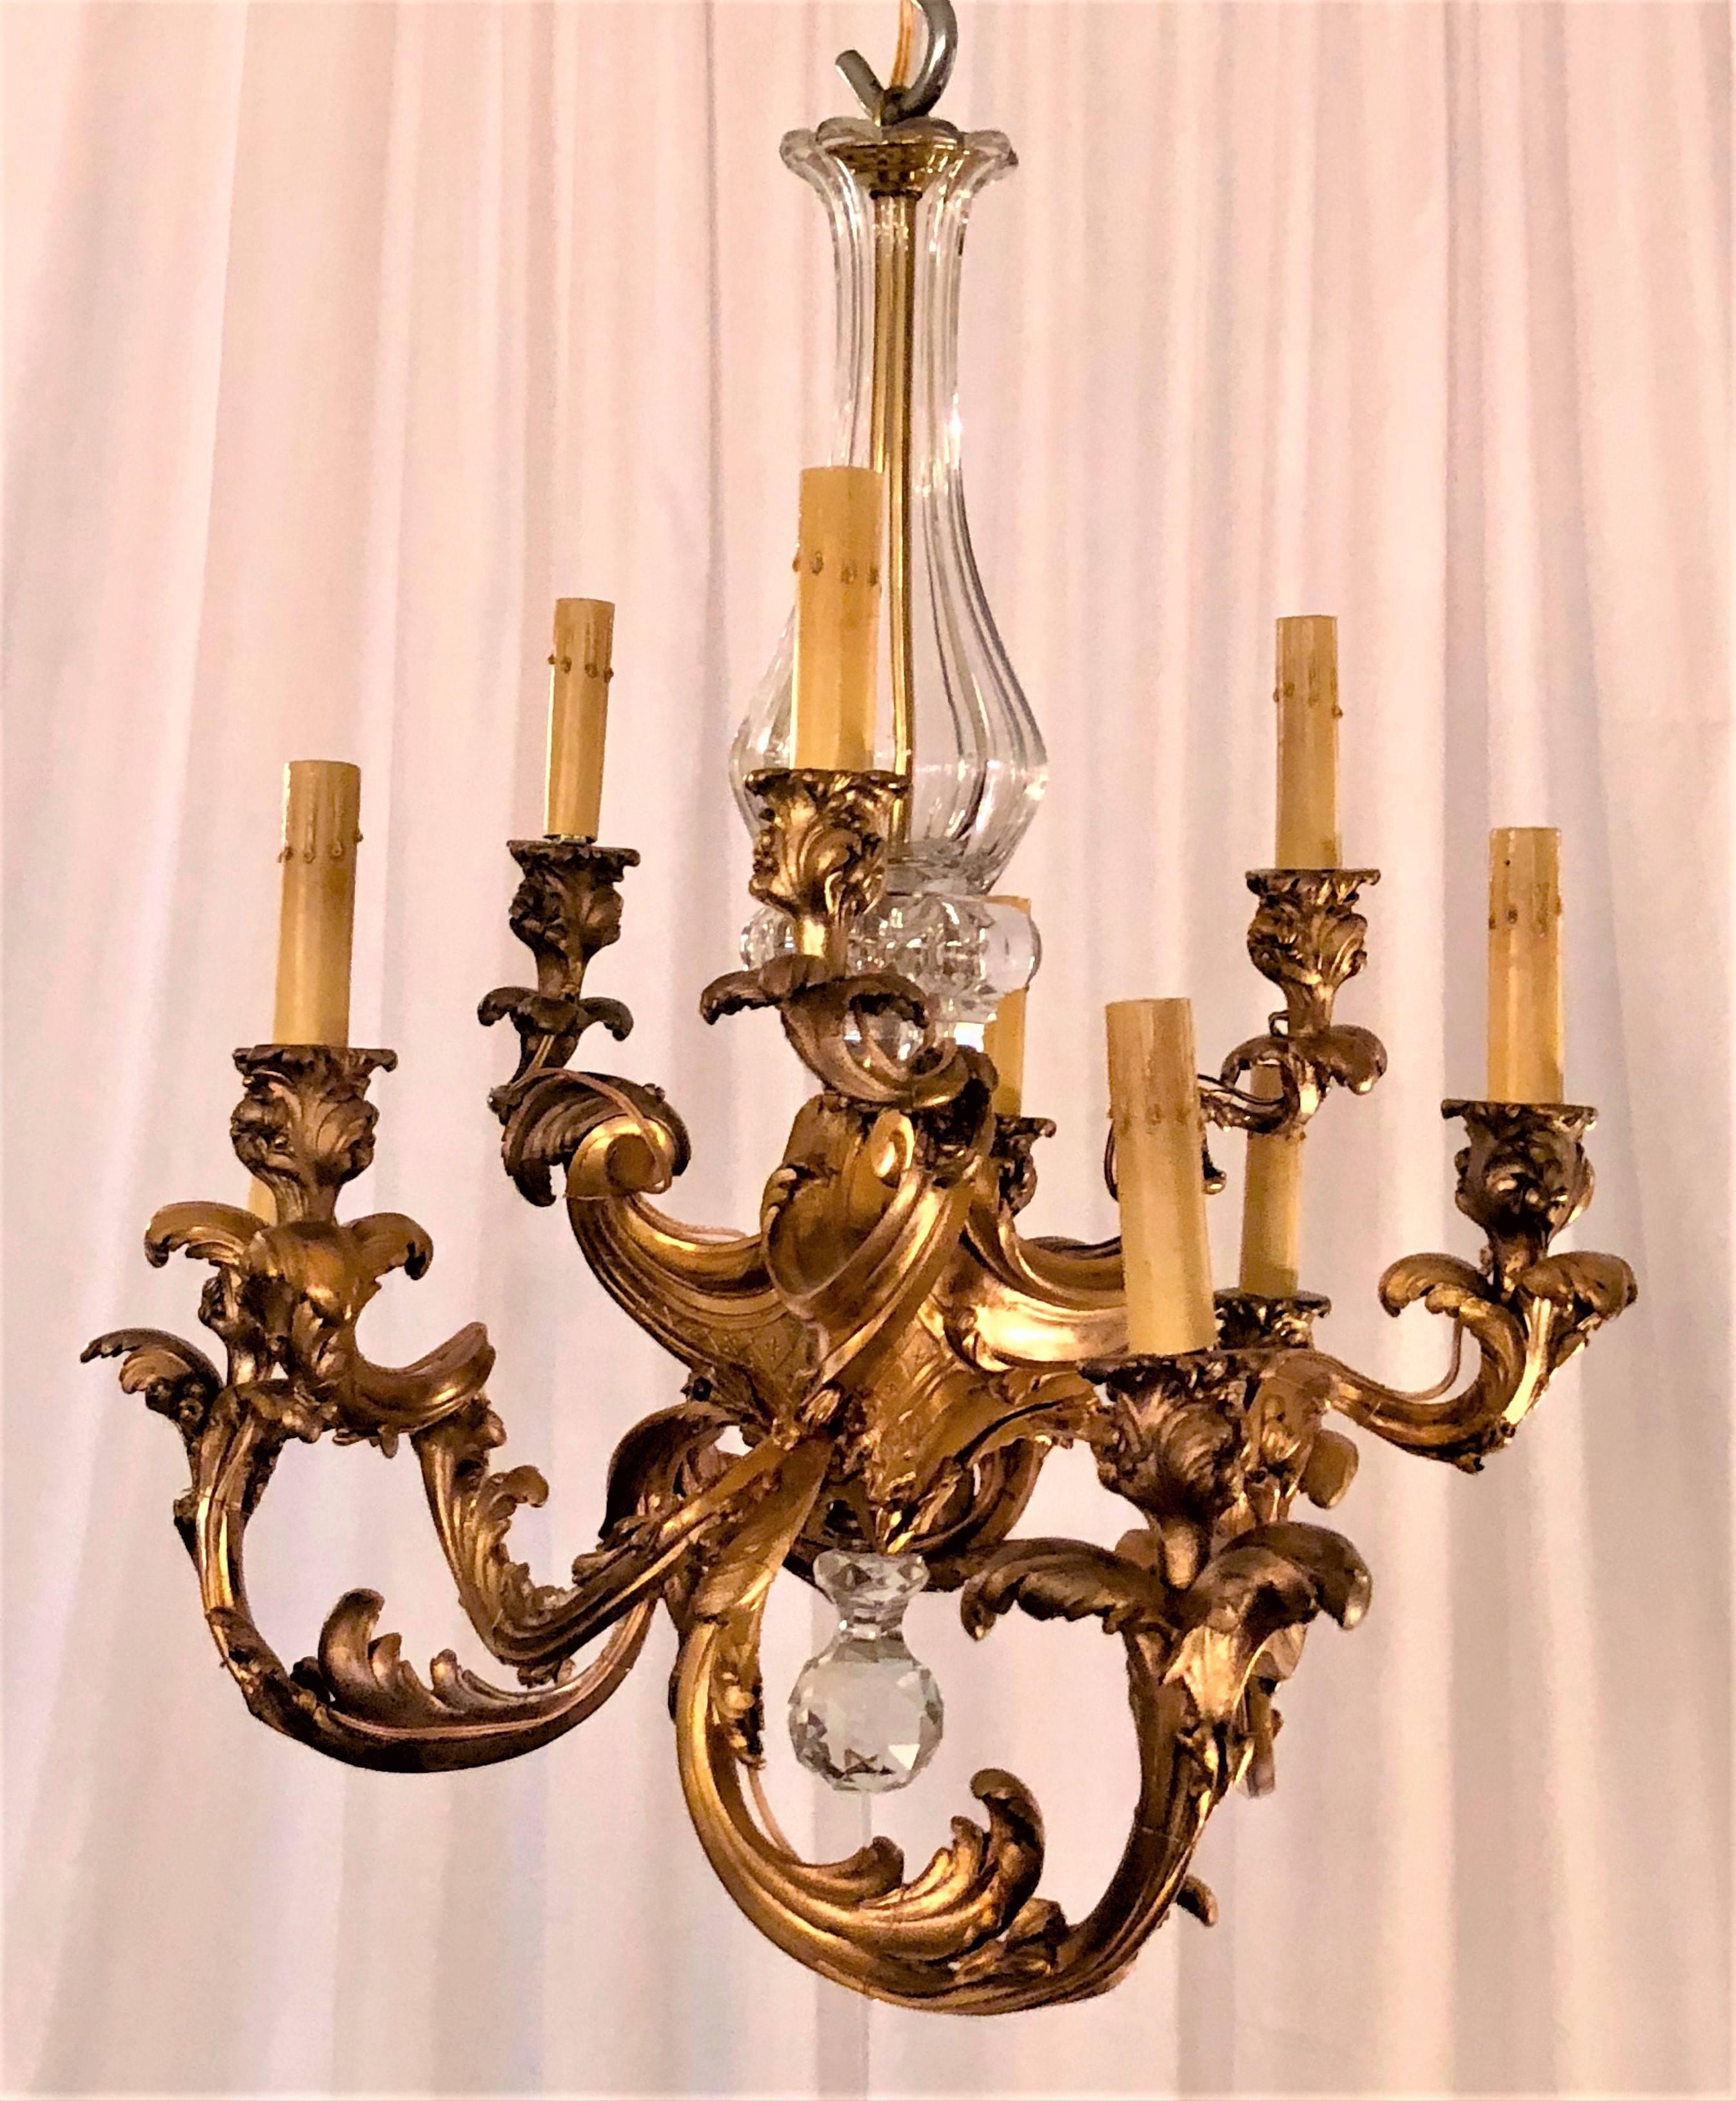 Typical of the period with rich decoration. A very nice sized fixture.